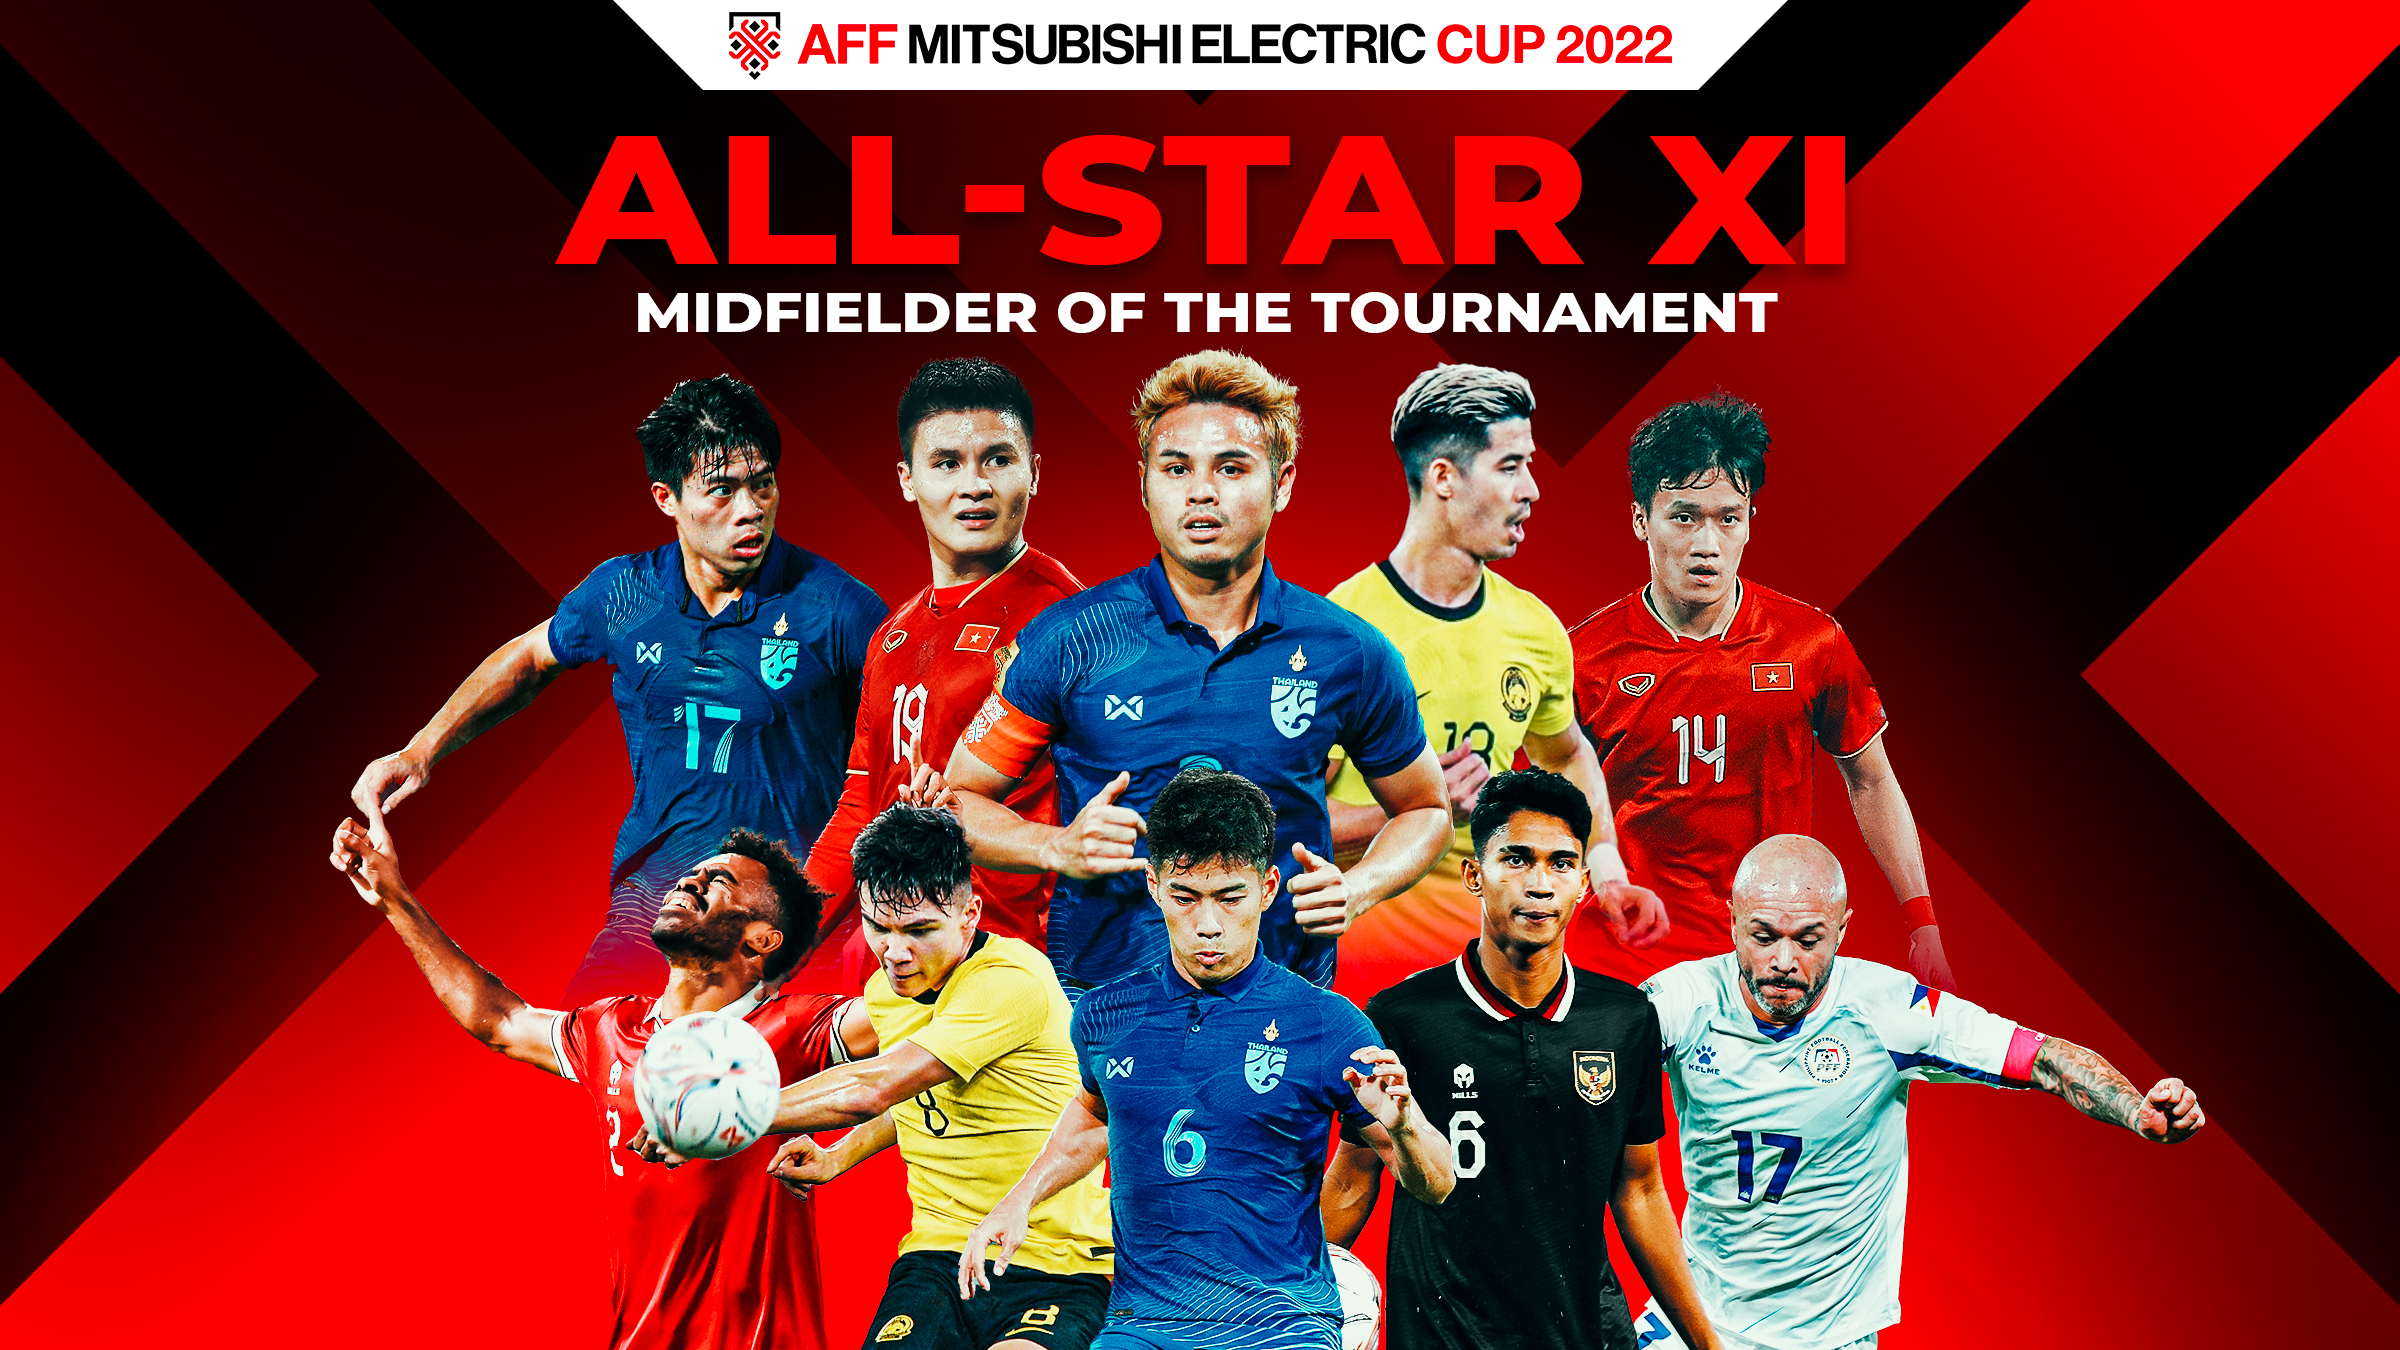 Vote For Your All-Star XI Midfielder Of The Tournament